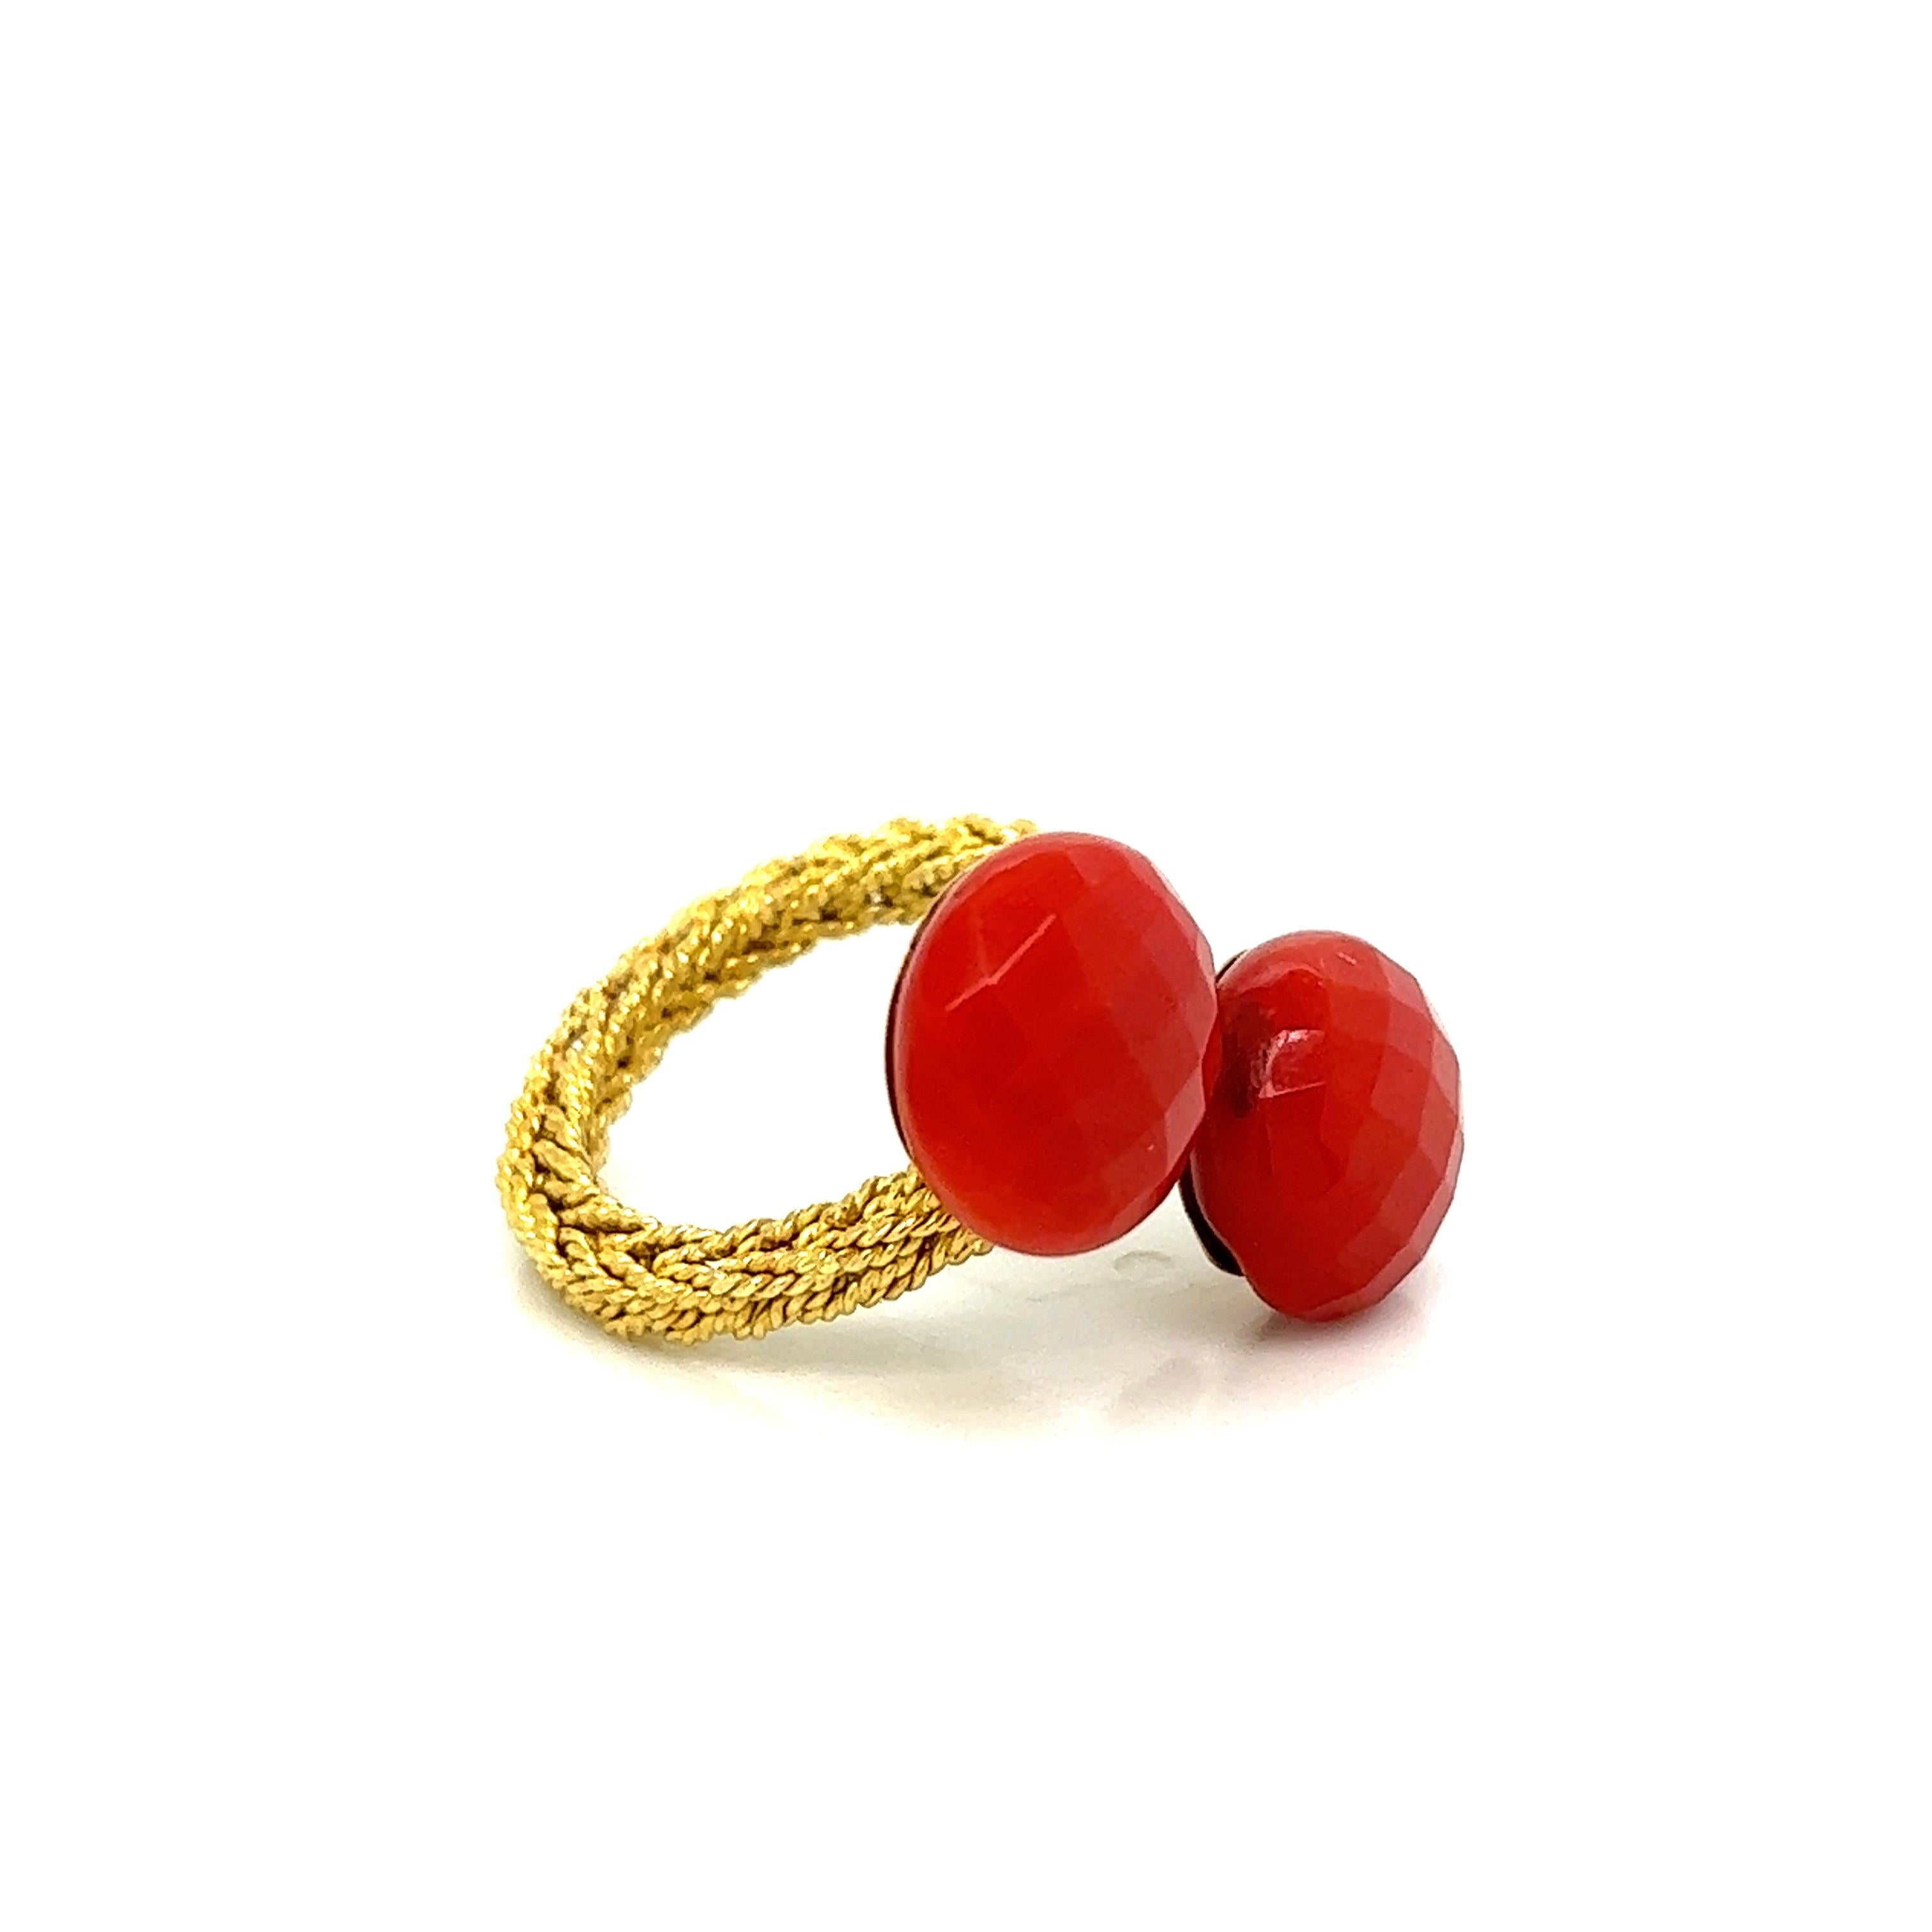 Faceted double coral gold ring 

Two faceted corals (12 x 12 mm each), braided gold band, 18 karat yellow gold

Size: 5.75 US
Total weight: 9.8 grams